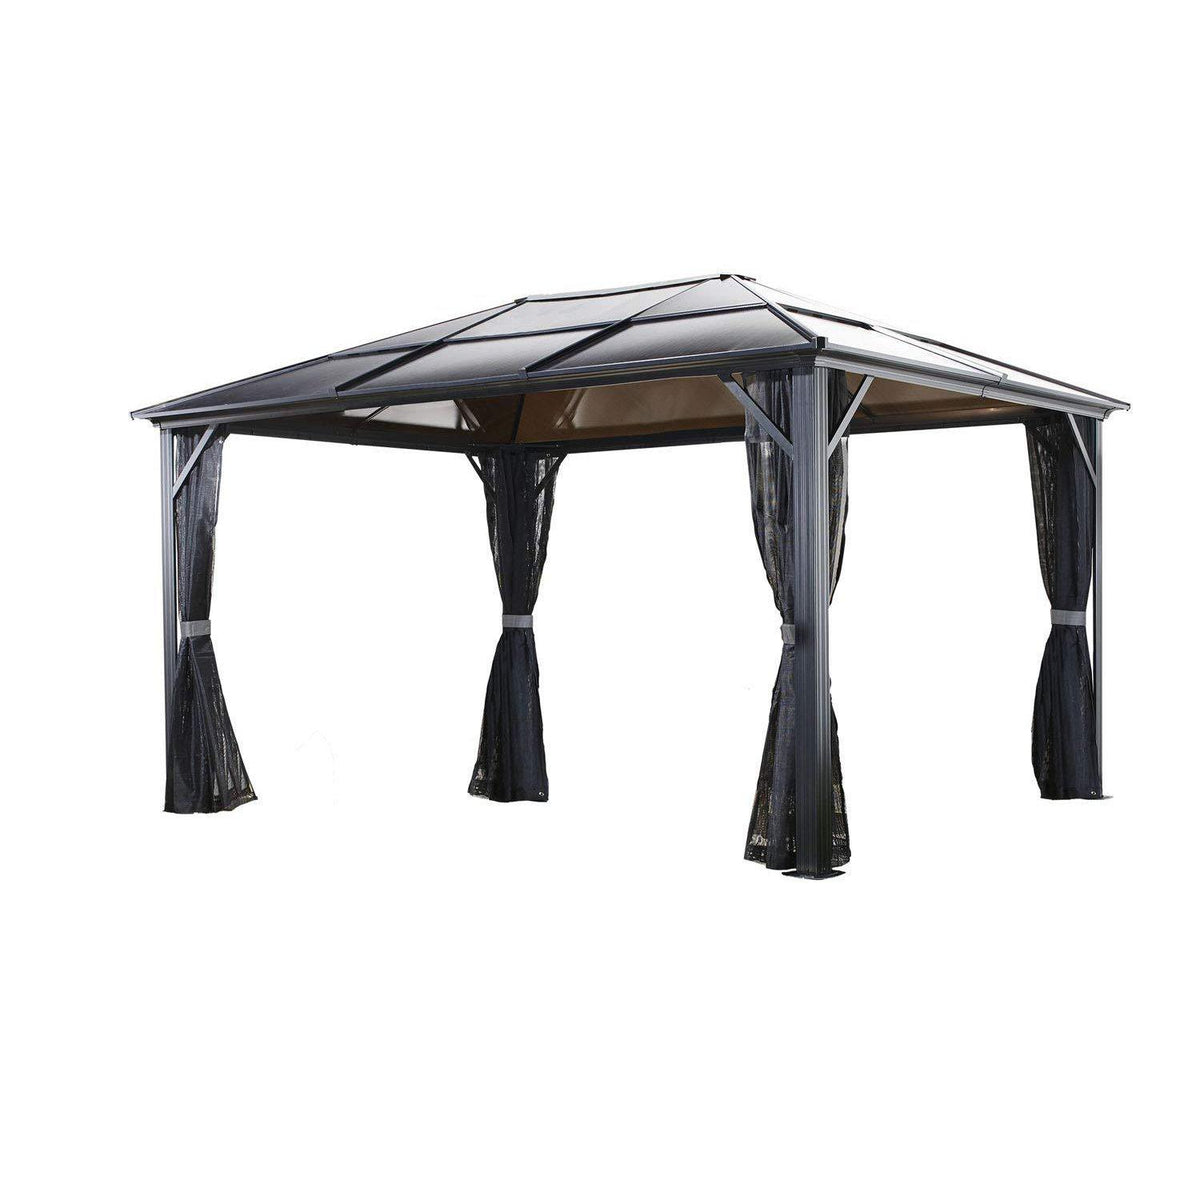 Sojag Meridien Hard Top Sun Shelter, 10' by 14', Charcoal